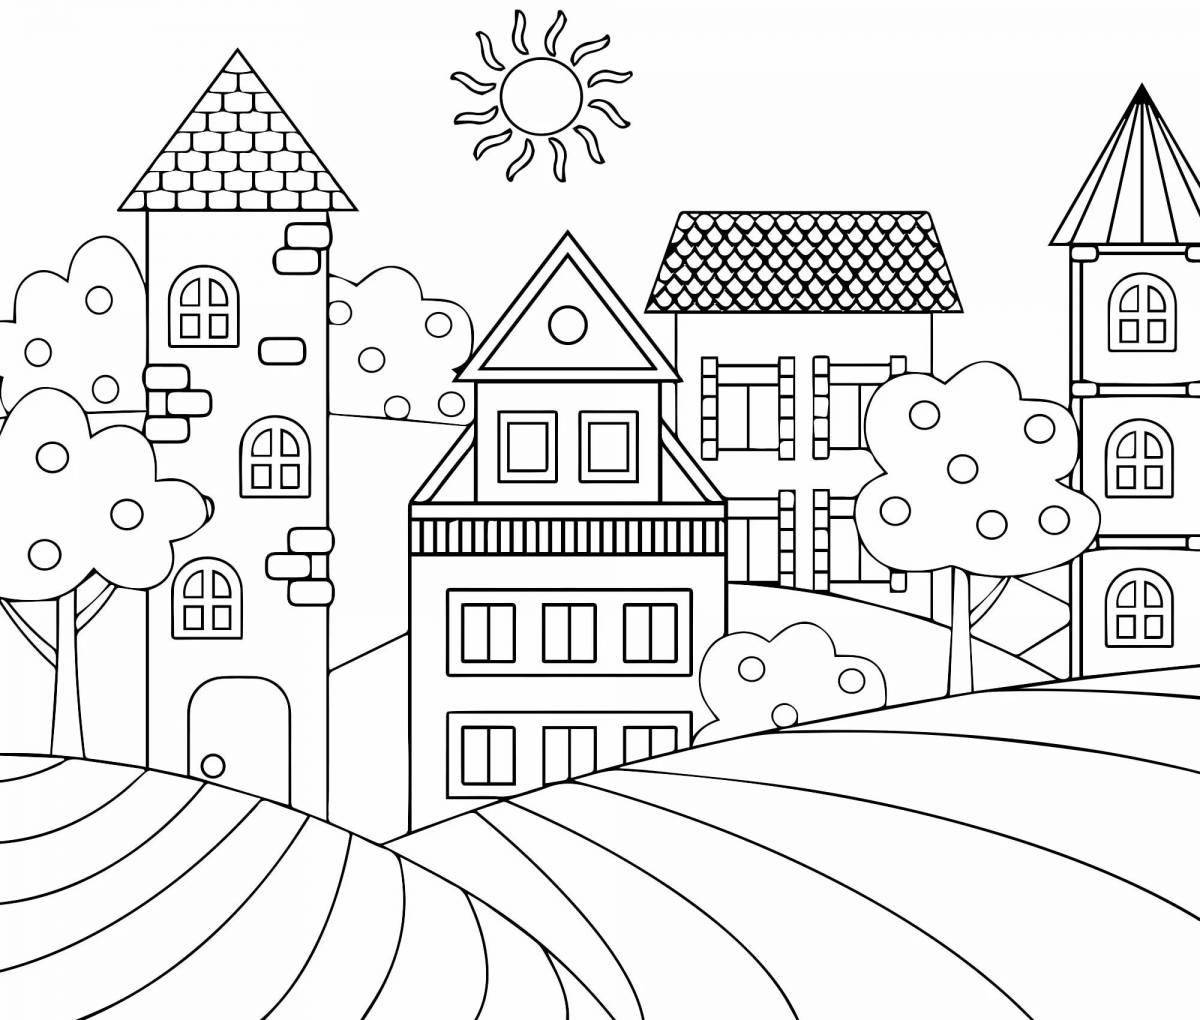 Coloring page charming my city